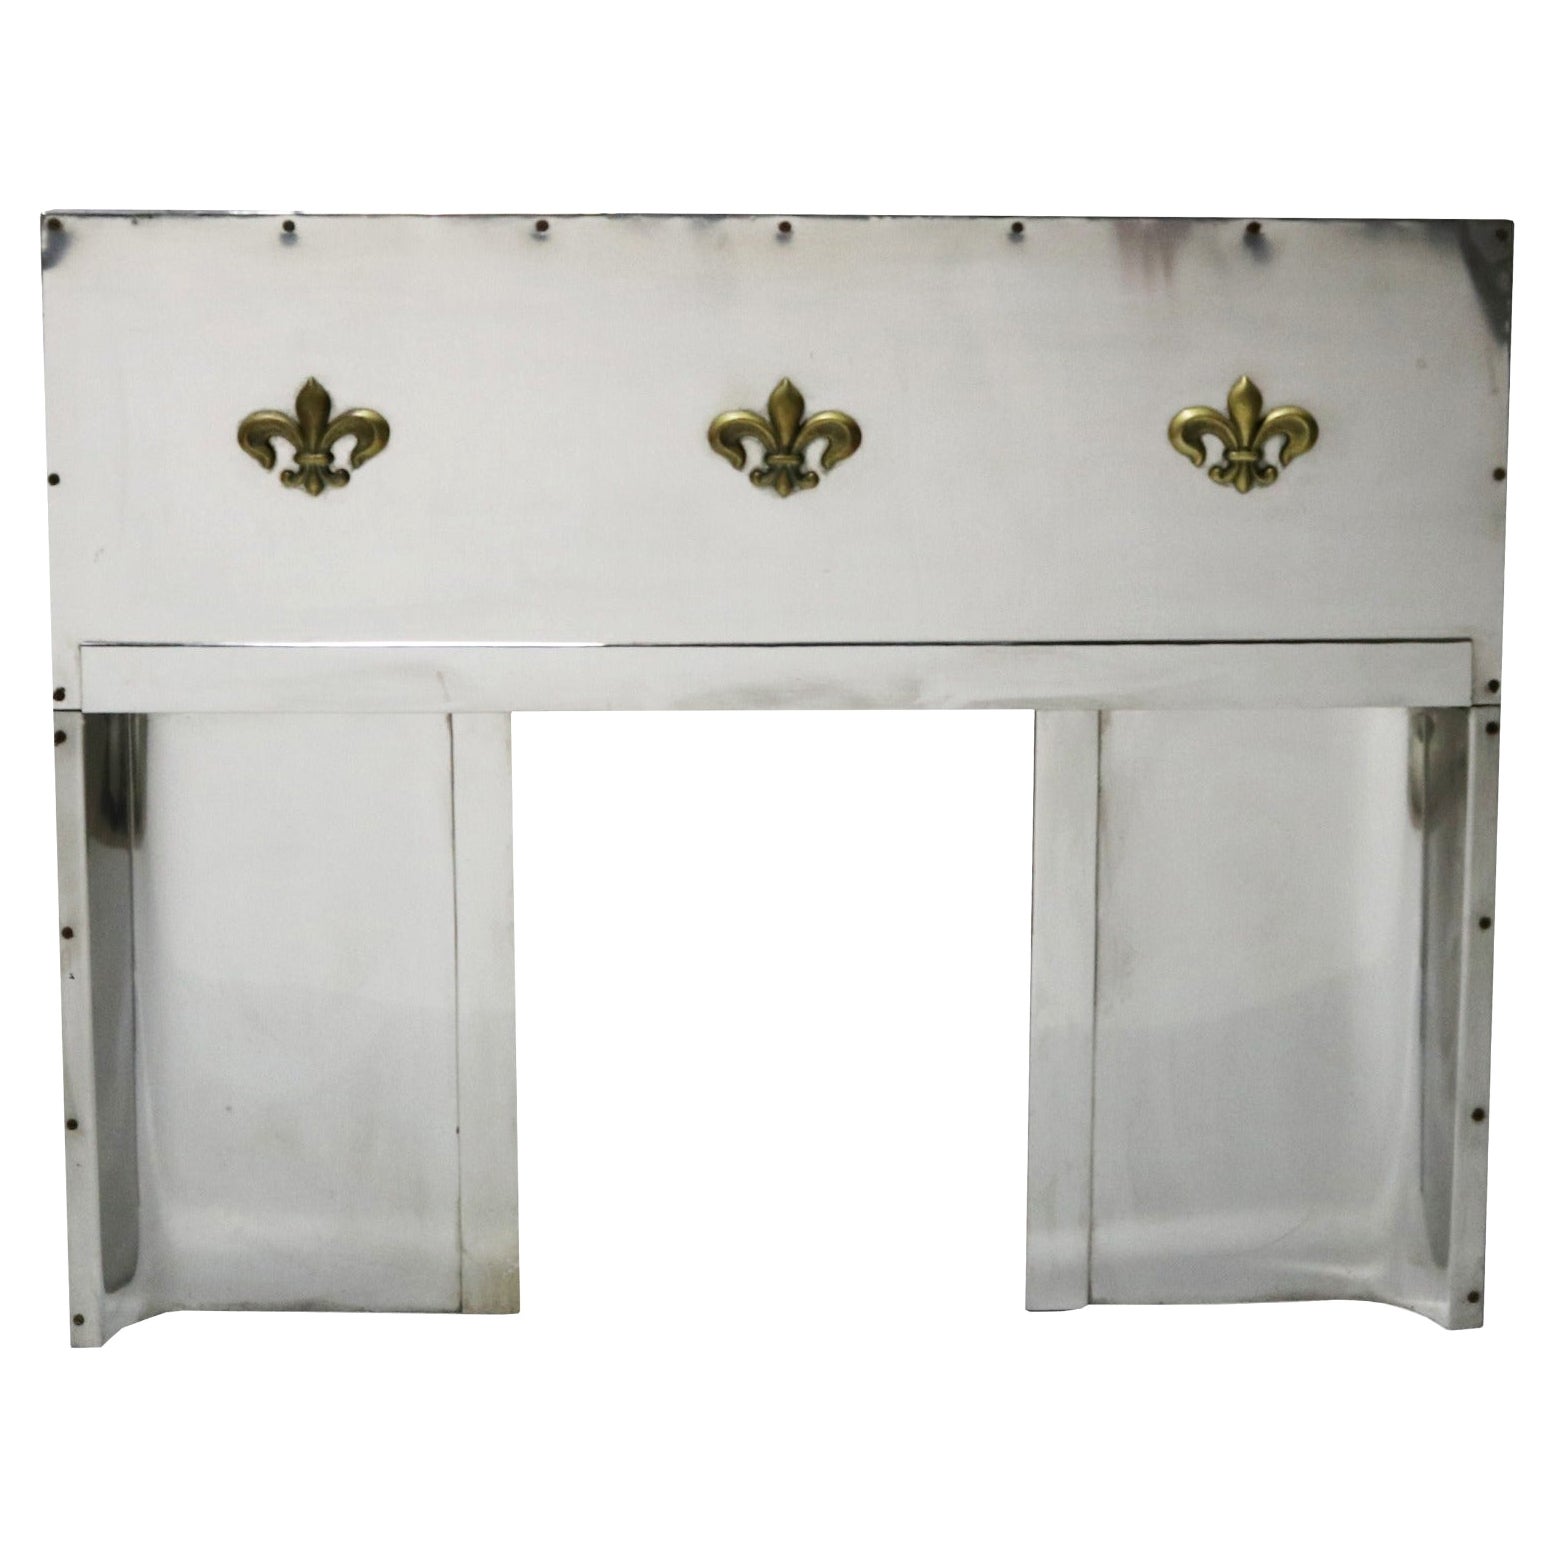 Stainless Steel Art Deco Fireplace Insert For Sale